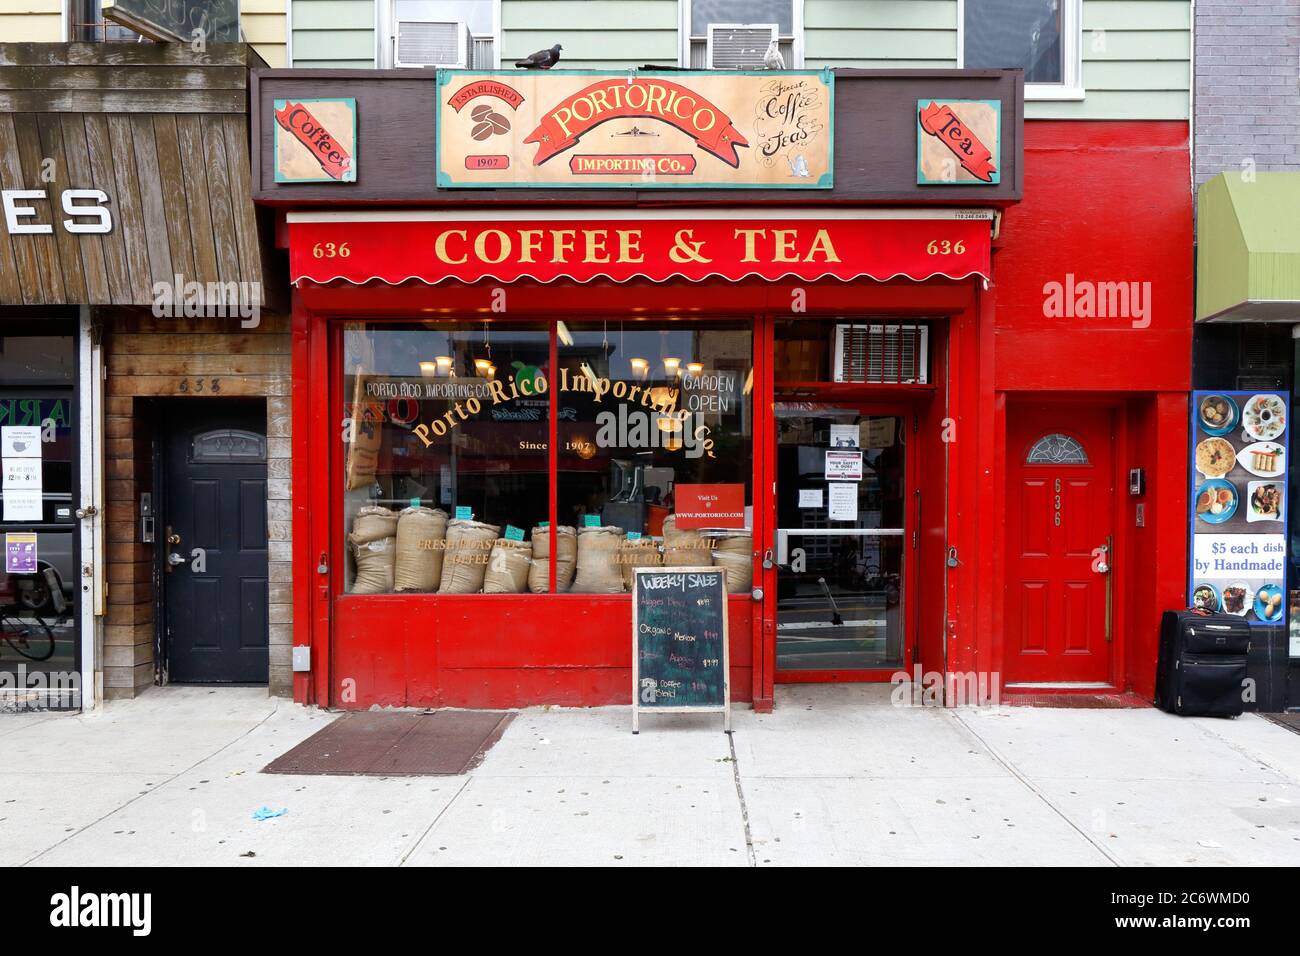 Porto Rico Importing Co., 636 Grand Street, Brooklyn, New York, NYC storefront photo of a coffee bean and tea store in the Williamsburg neighborhood. Stock Photo